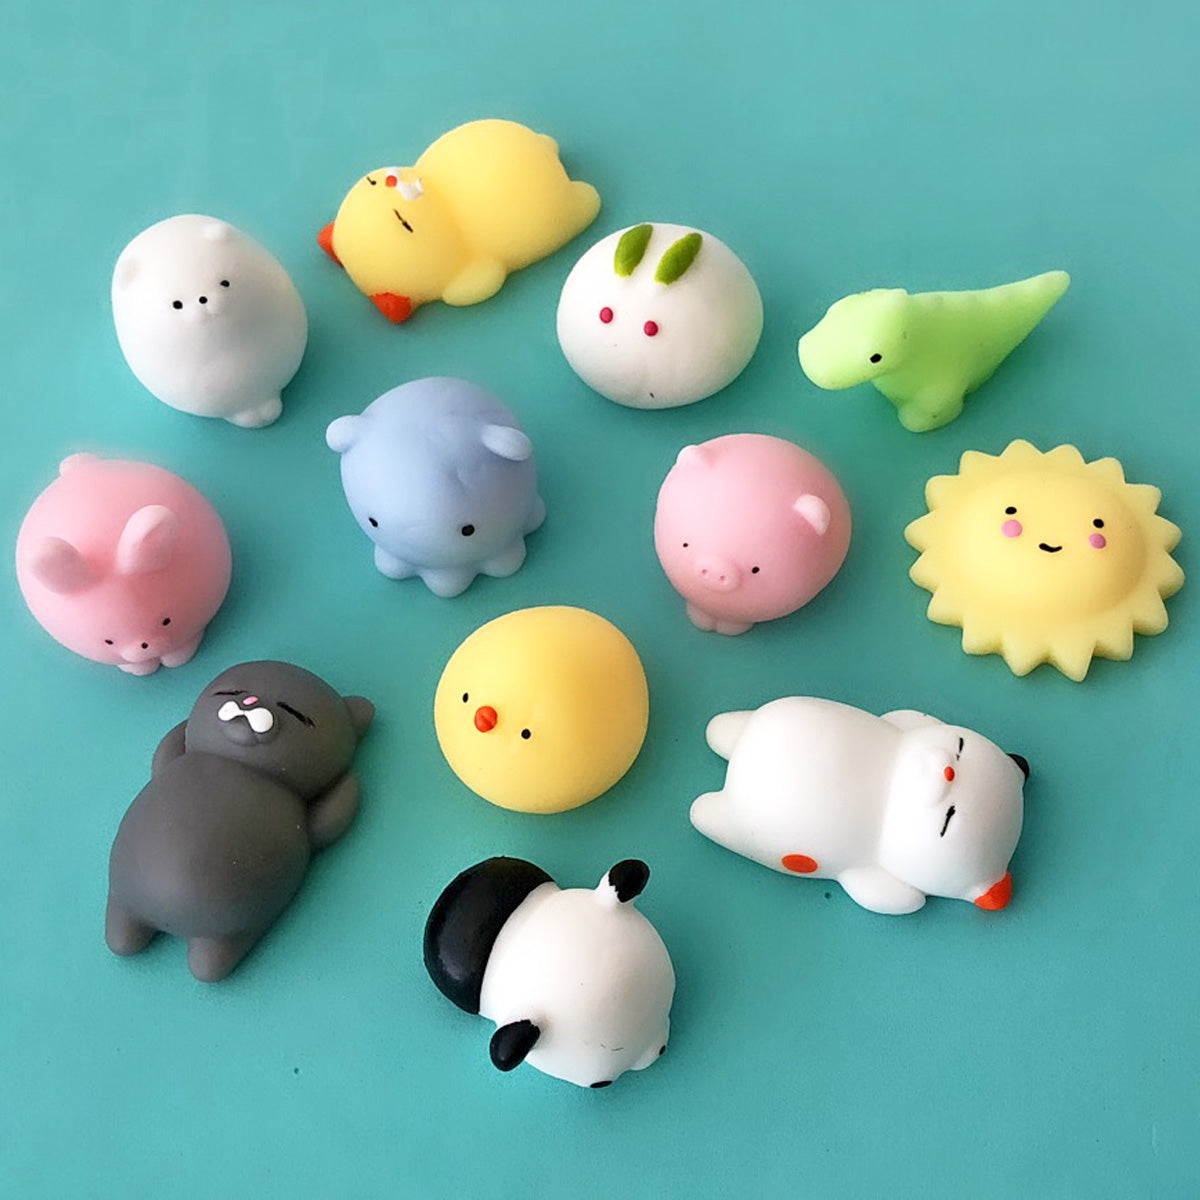 Cheap Mt Toys NEW Mochi Squishies Kawaii Anima Squishy Toys For